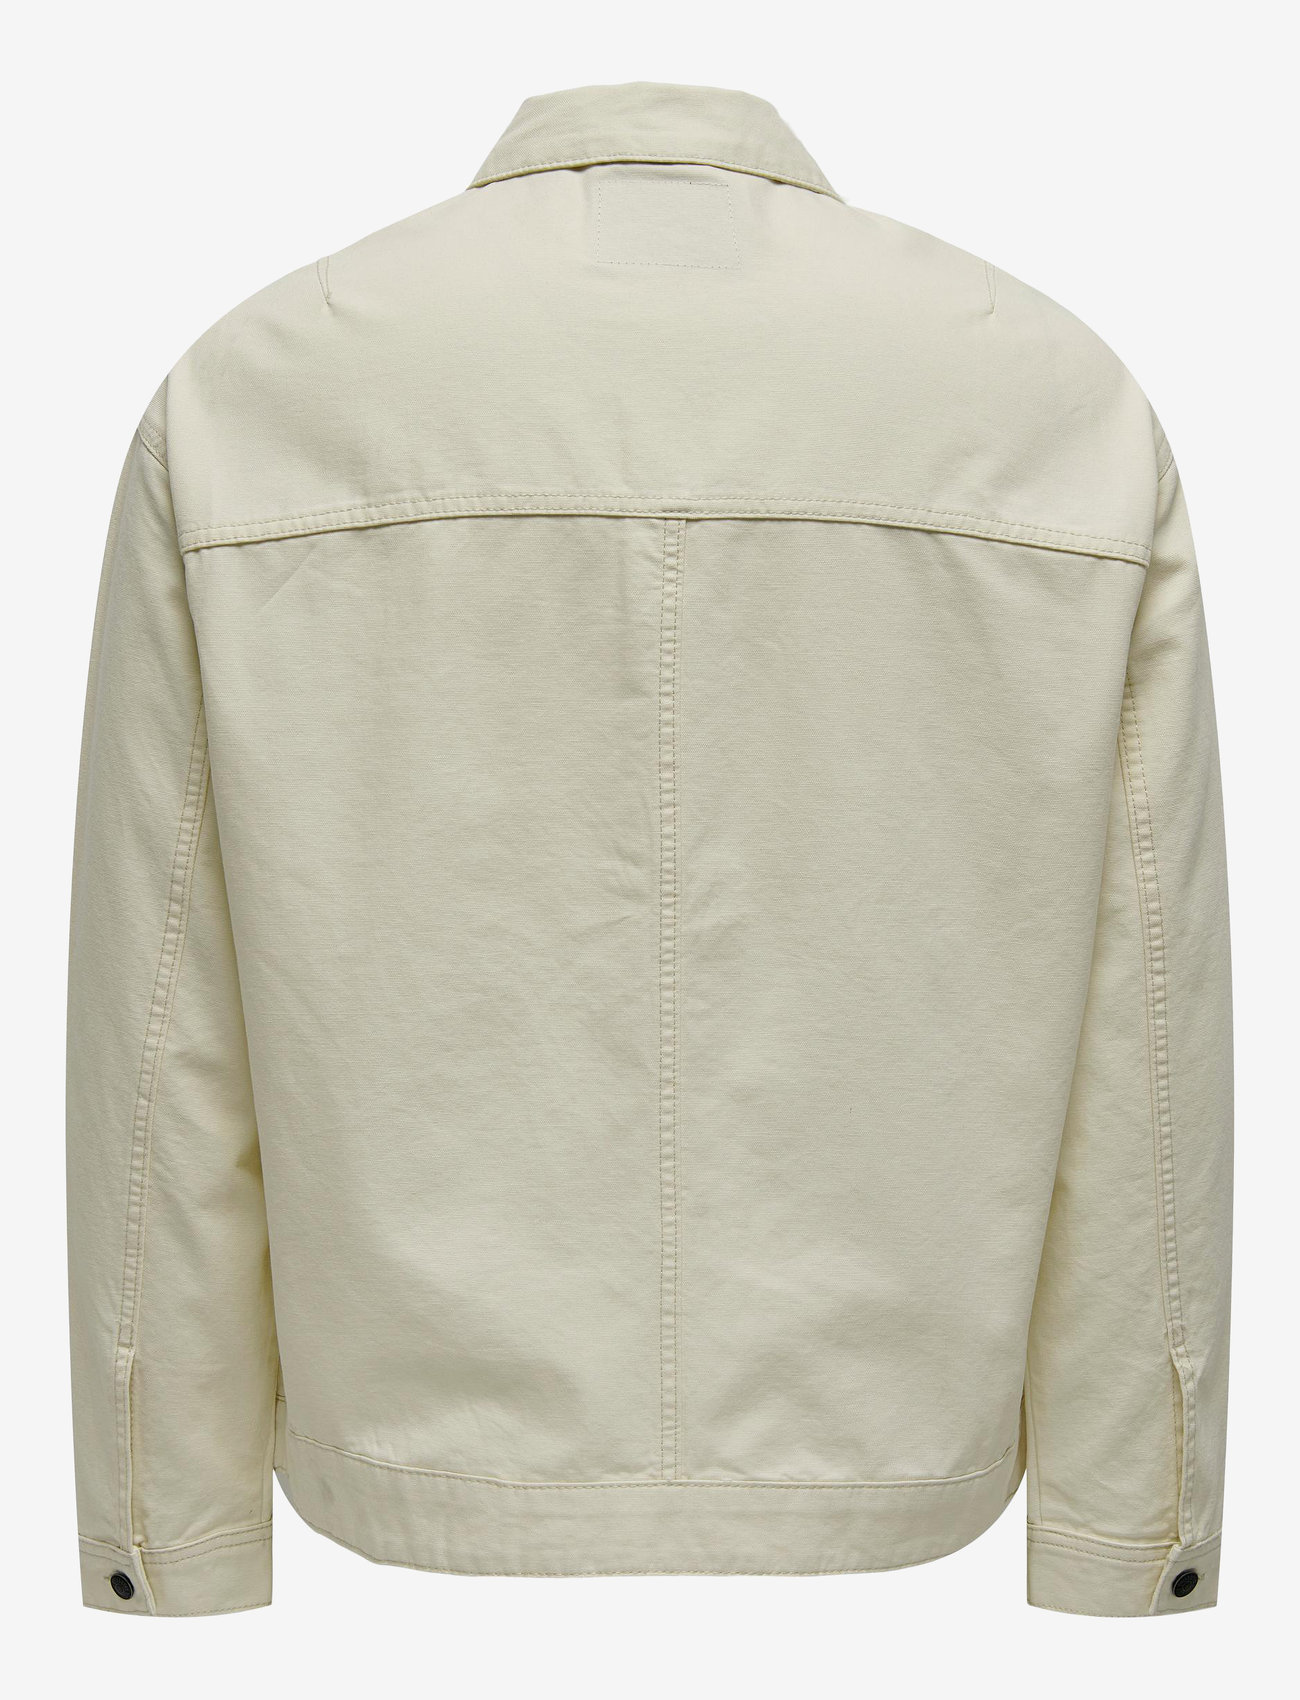 ONLY & SONS - ONSEND OVZ CANWAS 4470 JACKET - ecru - 1